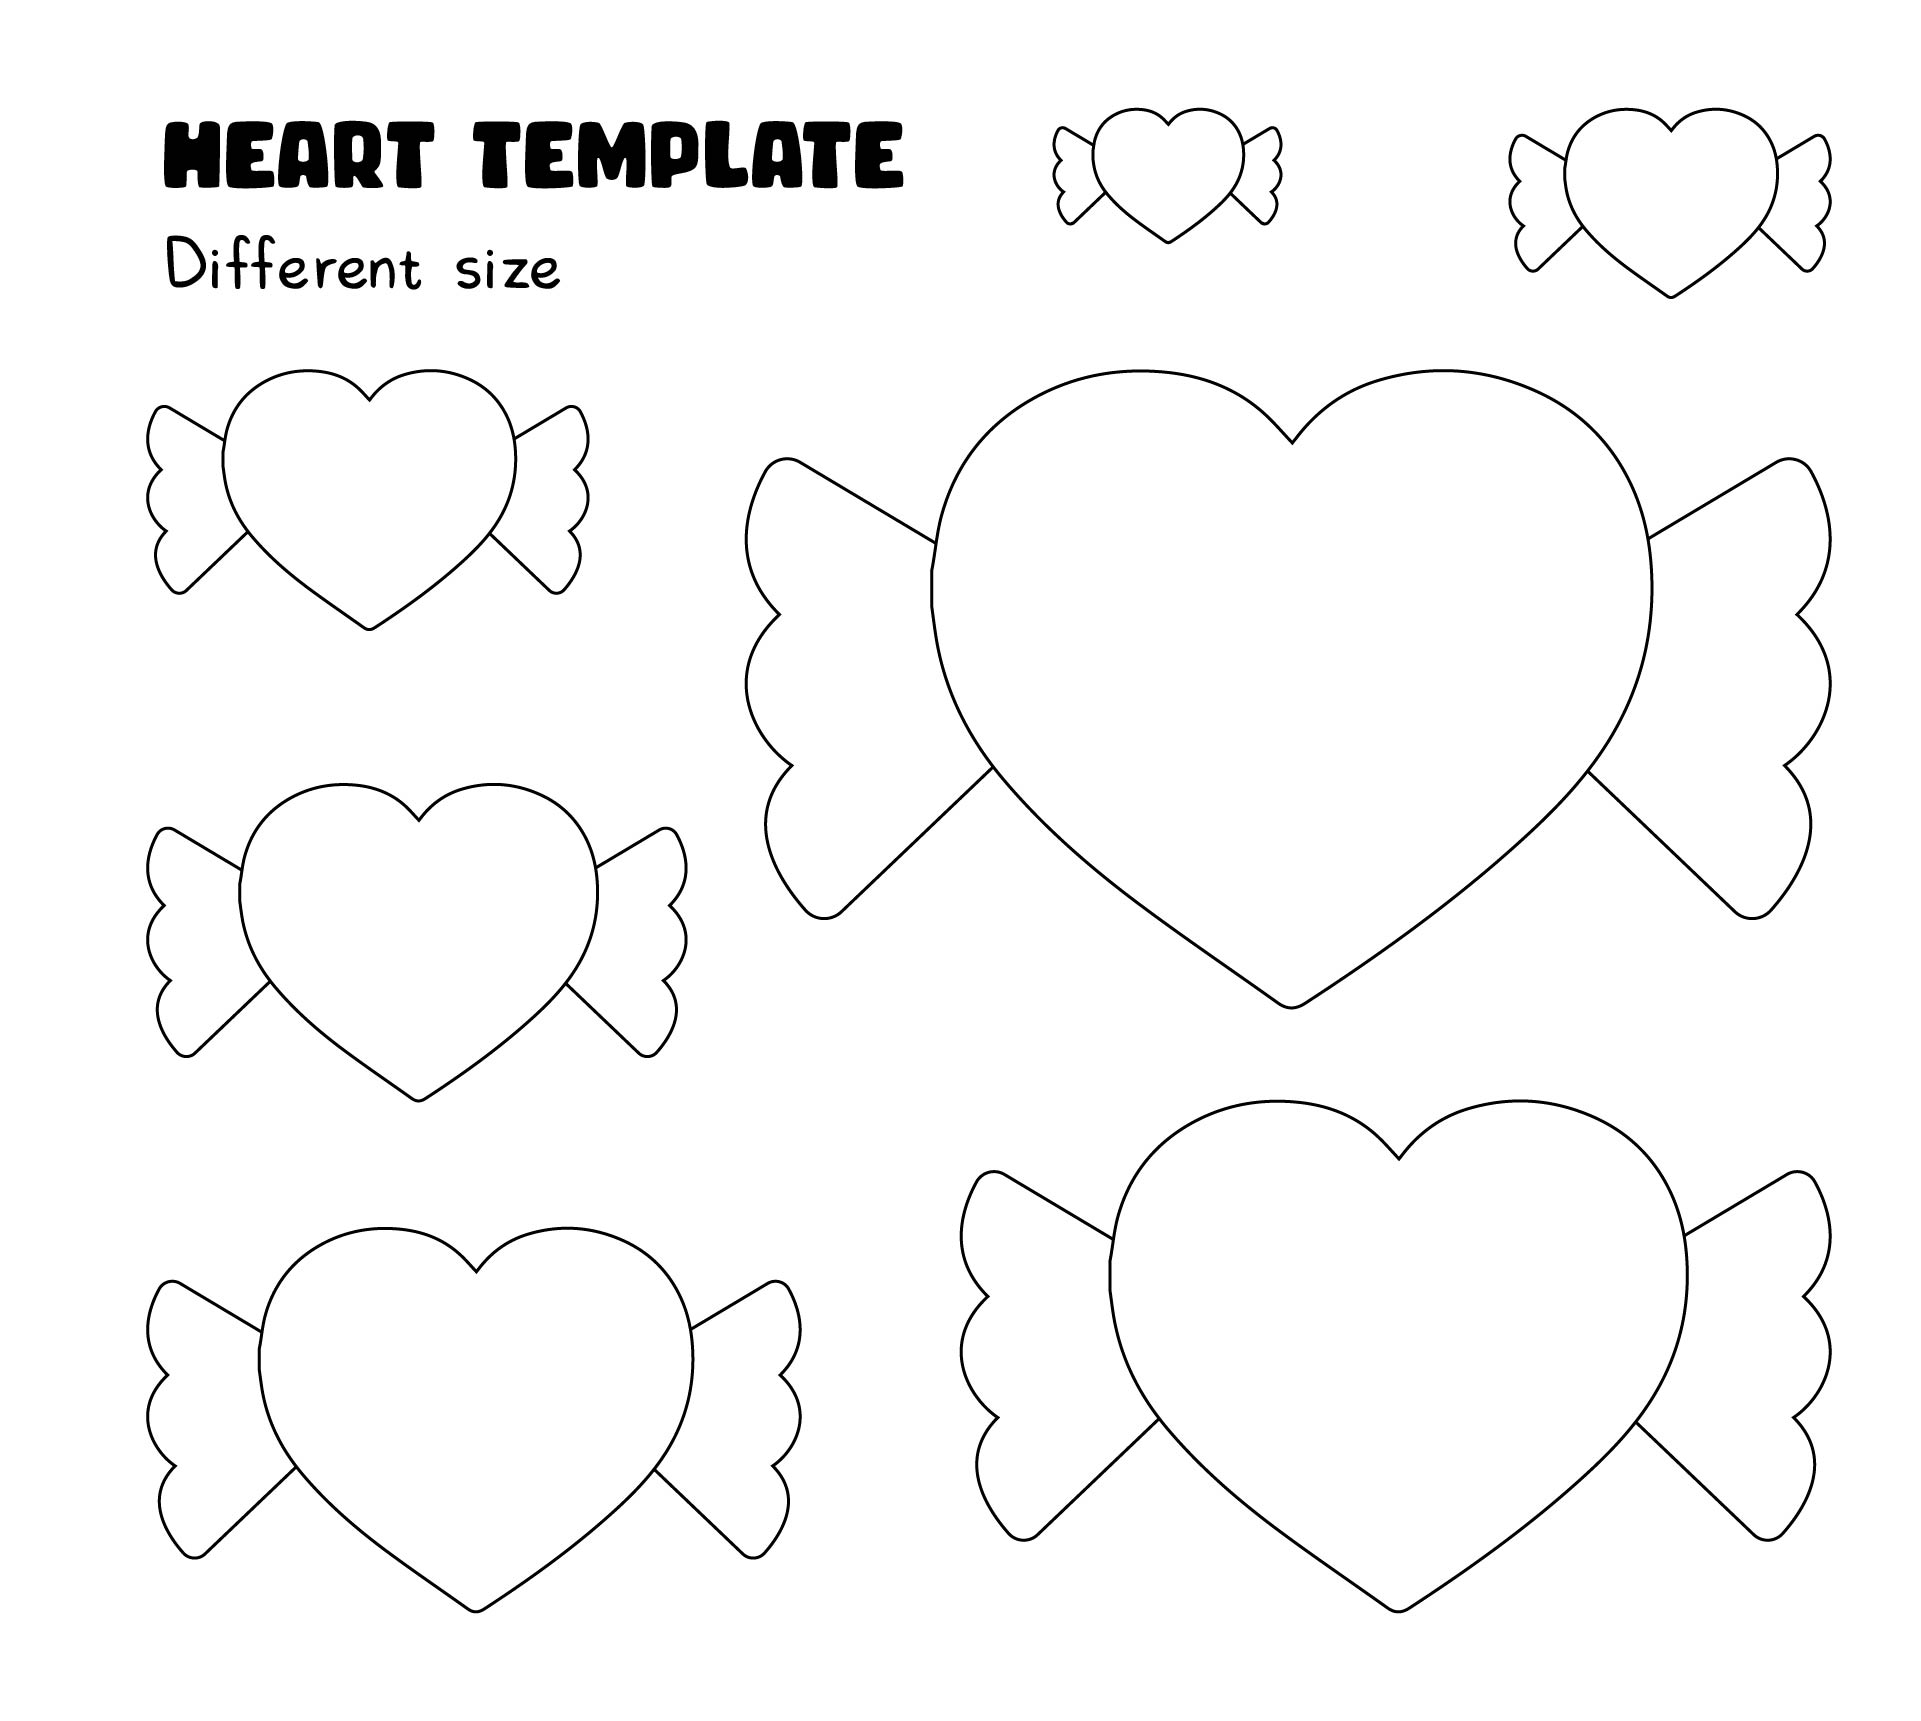 Heart Template Printable Different Sizes